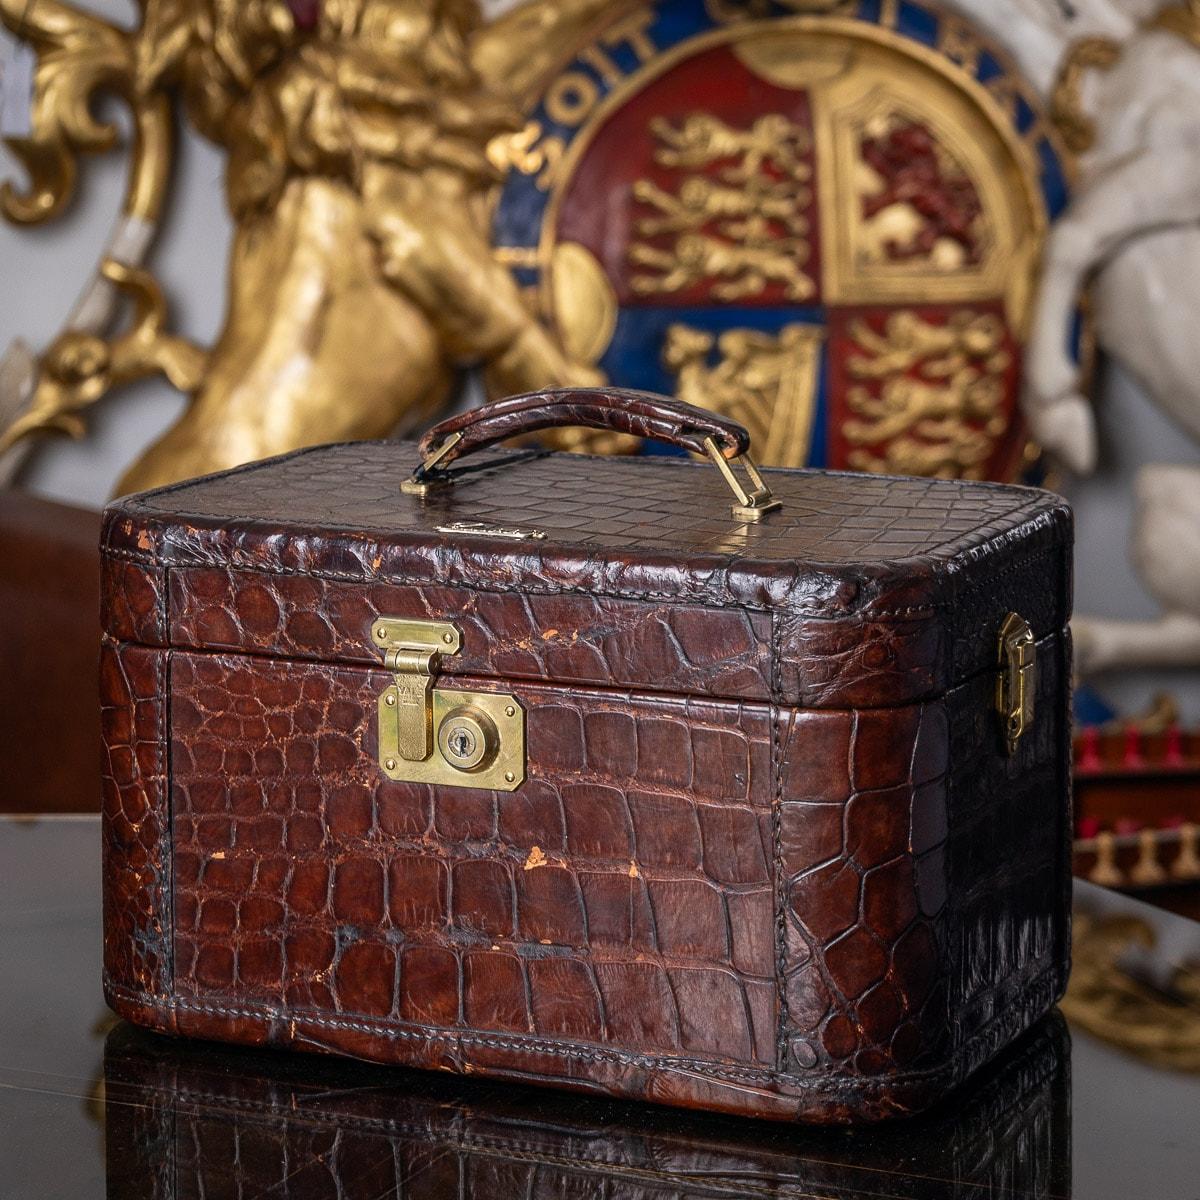 A stunning mid 20th Century crocodile leather & brass overnight vanity case by Gucci of Florence, Italy. This case features a leather carrying strap on the lid along with a locking mechanism on the front & sides. The inside is lined with fabric and